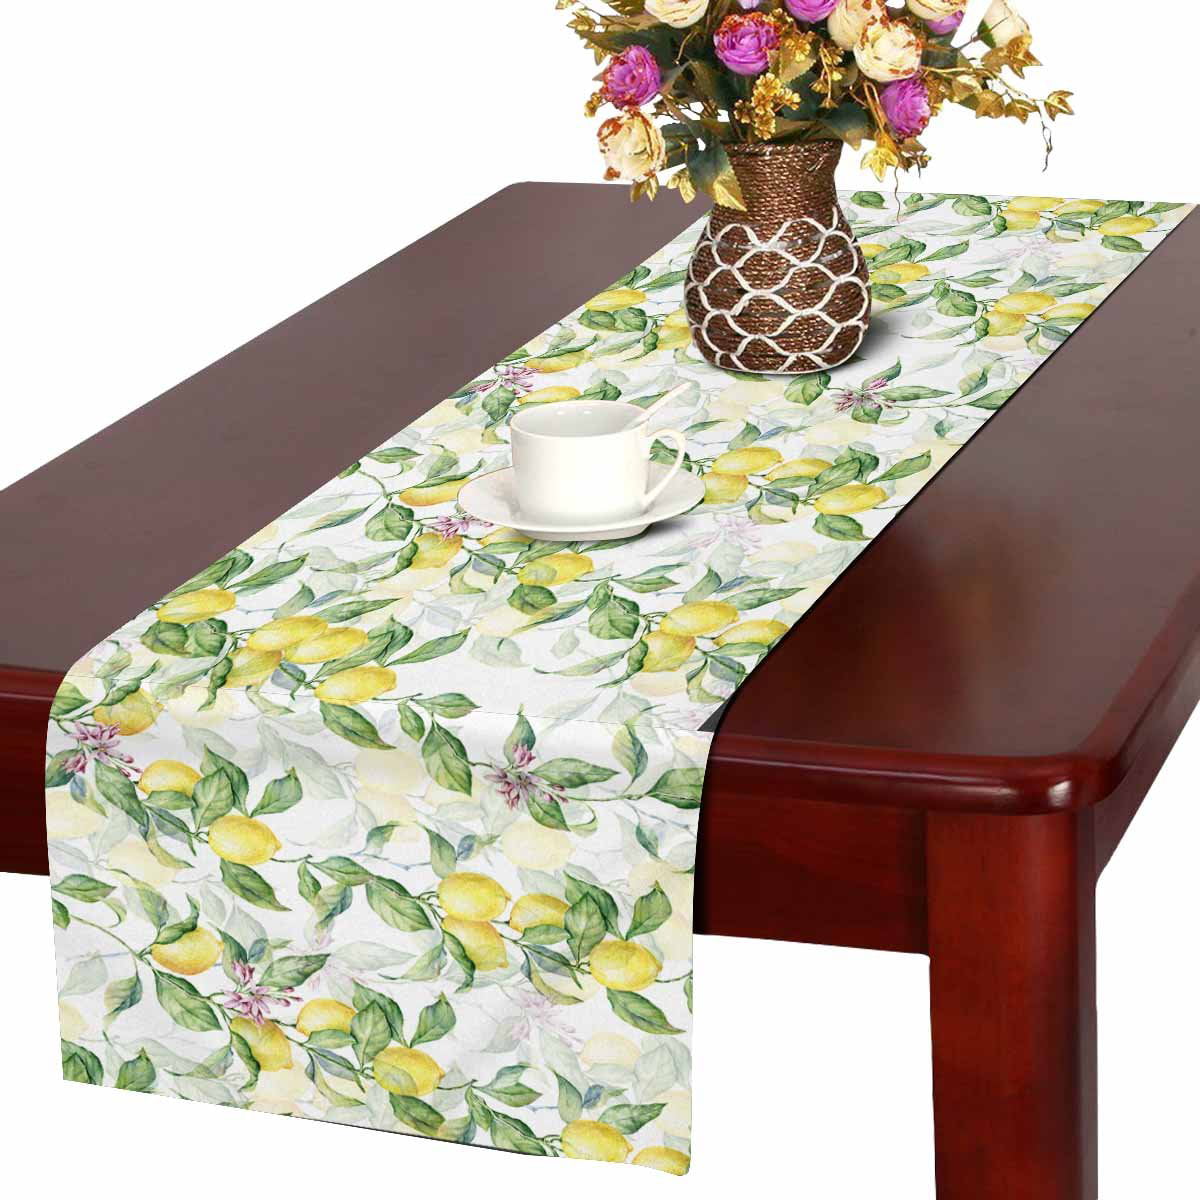 AUUXVA Tropical Palm Leaves Lemon Table Runner 13x70 inch Rectangle Table Cloth Runner Polyester for Office Kitchen Dining Wedding Party Home Coffee Table